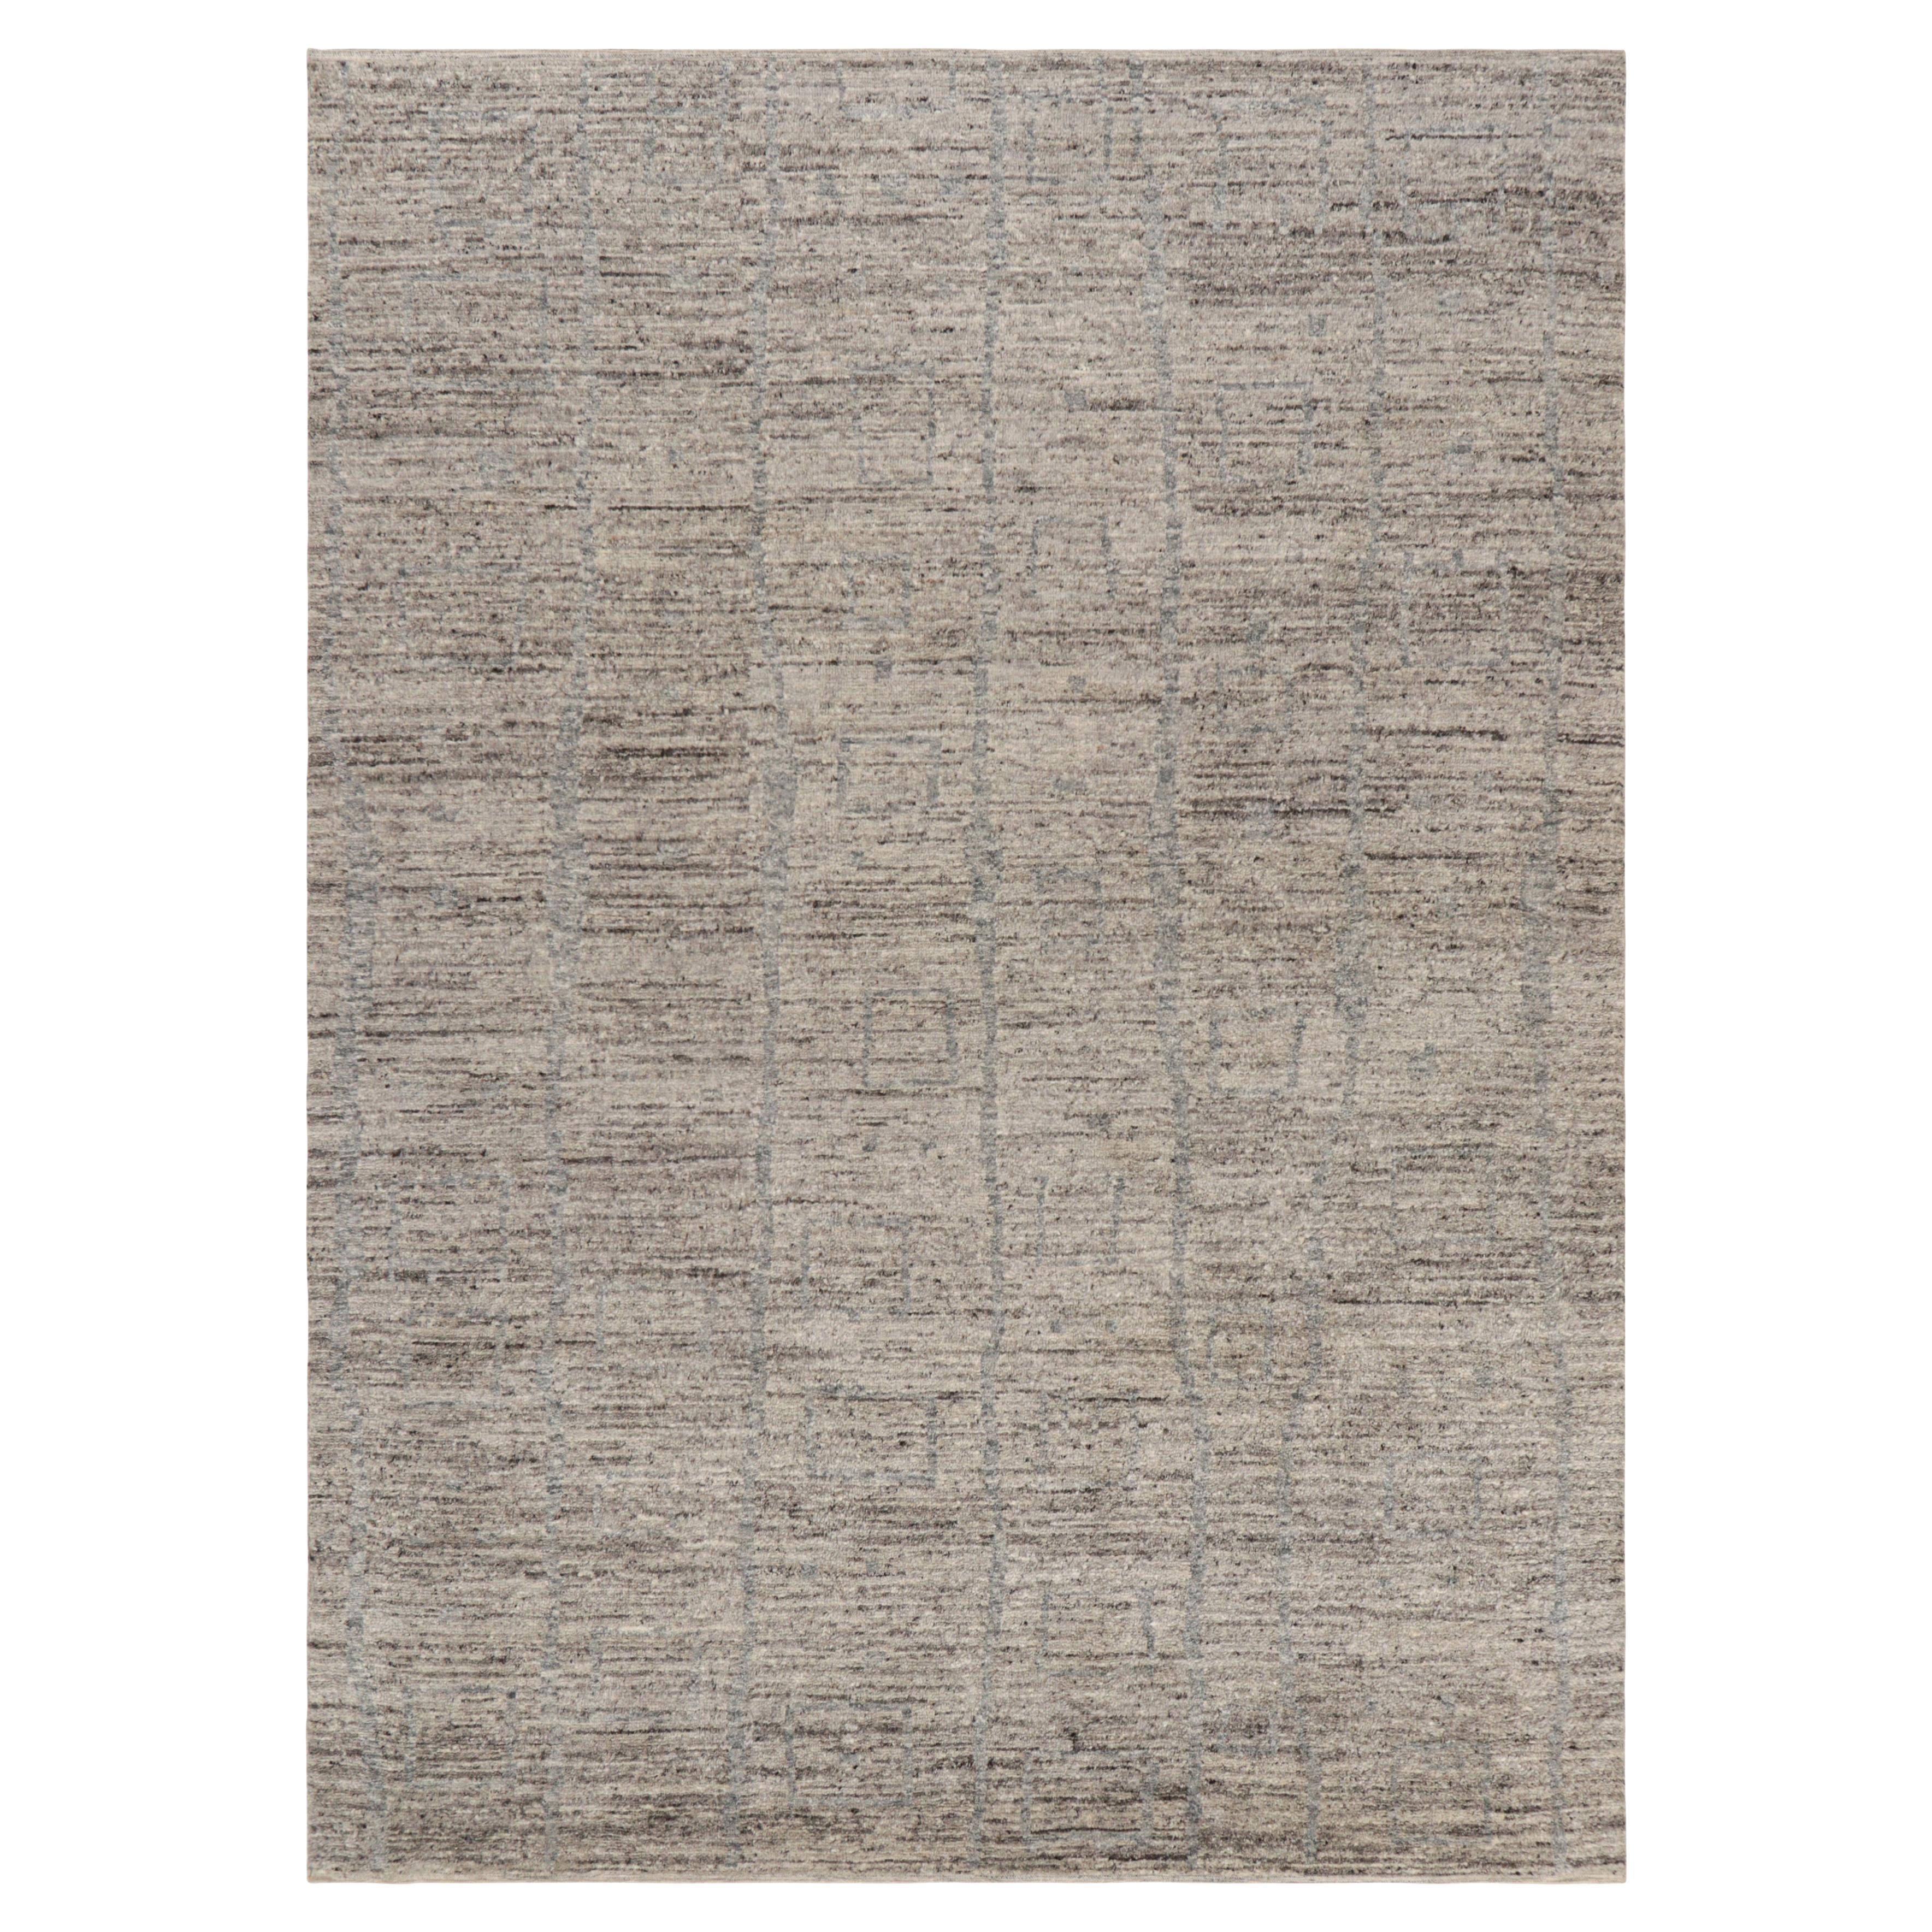 Rug & Kilim’s Moroccan Style Rug in Beige-Brown with Gray Geometric Patterns For Sale